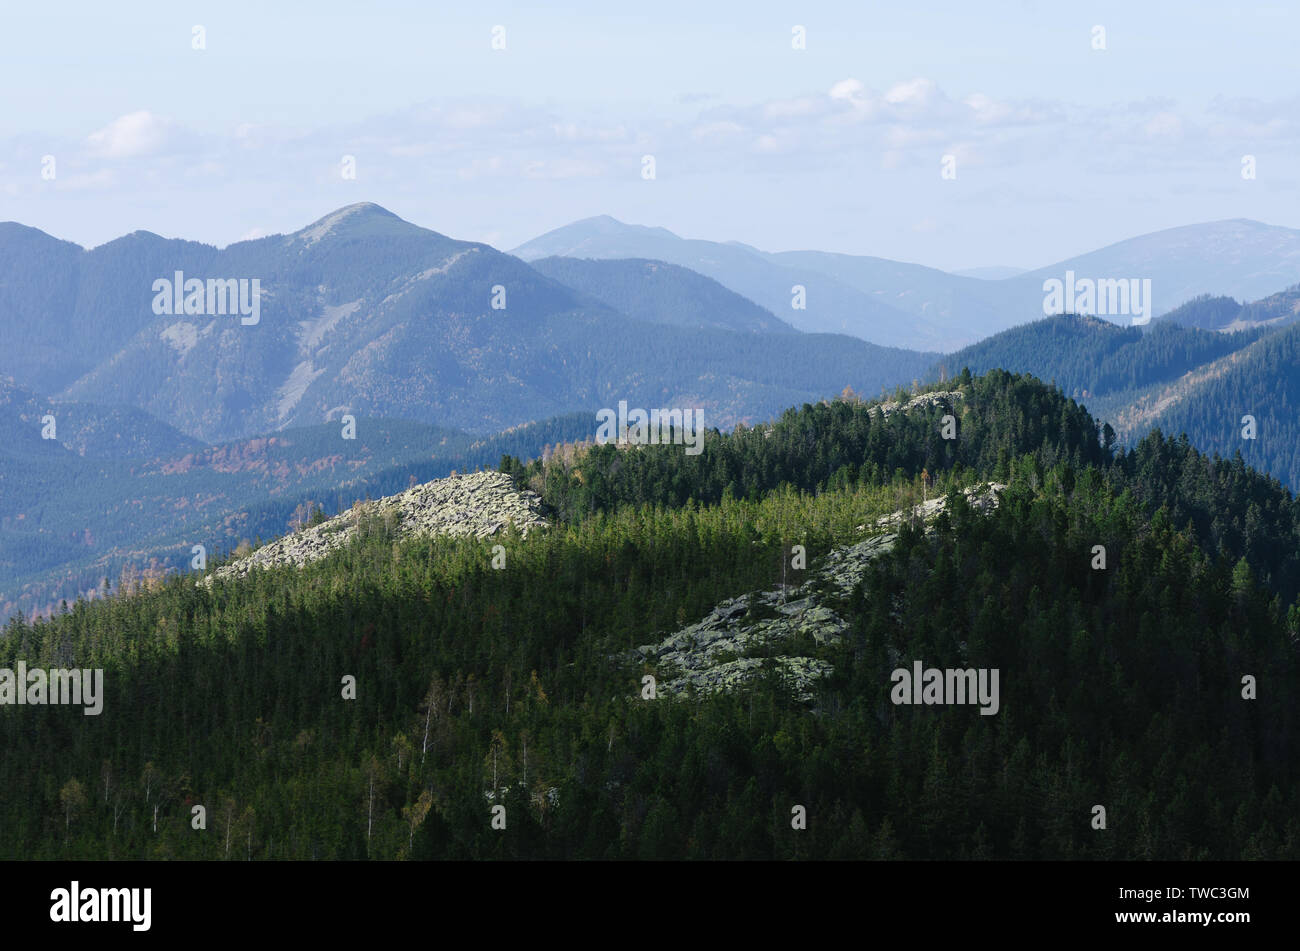 Fir forest on the slope of the mountains. Landscape with a view of the mountain ranges Stock Photo